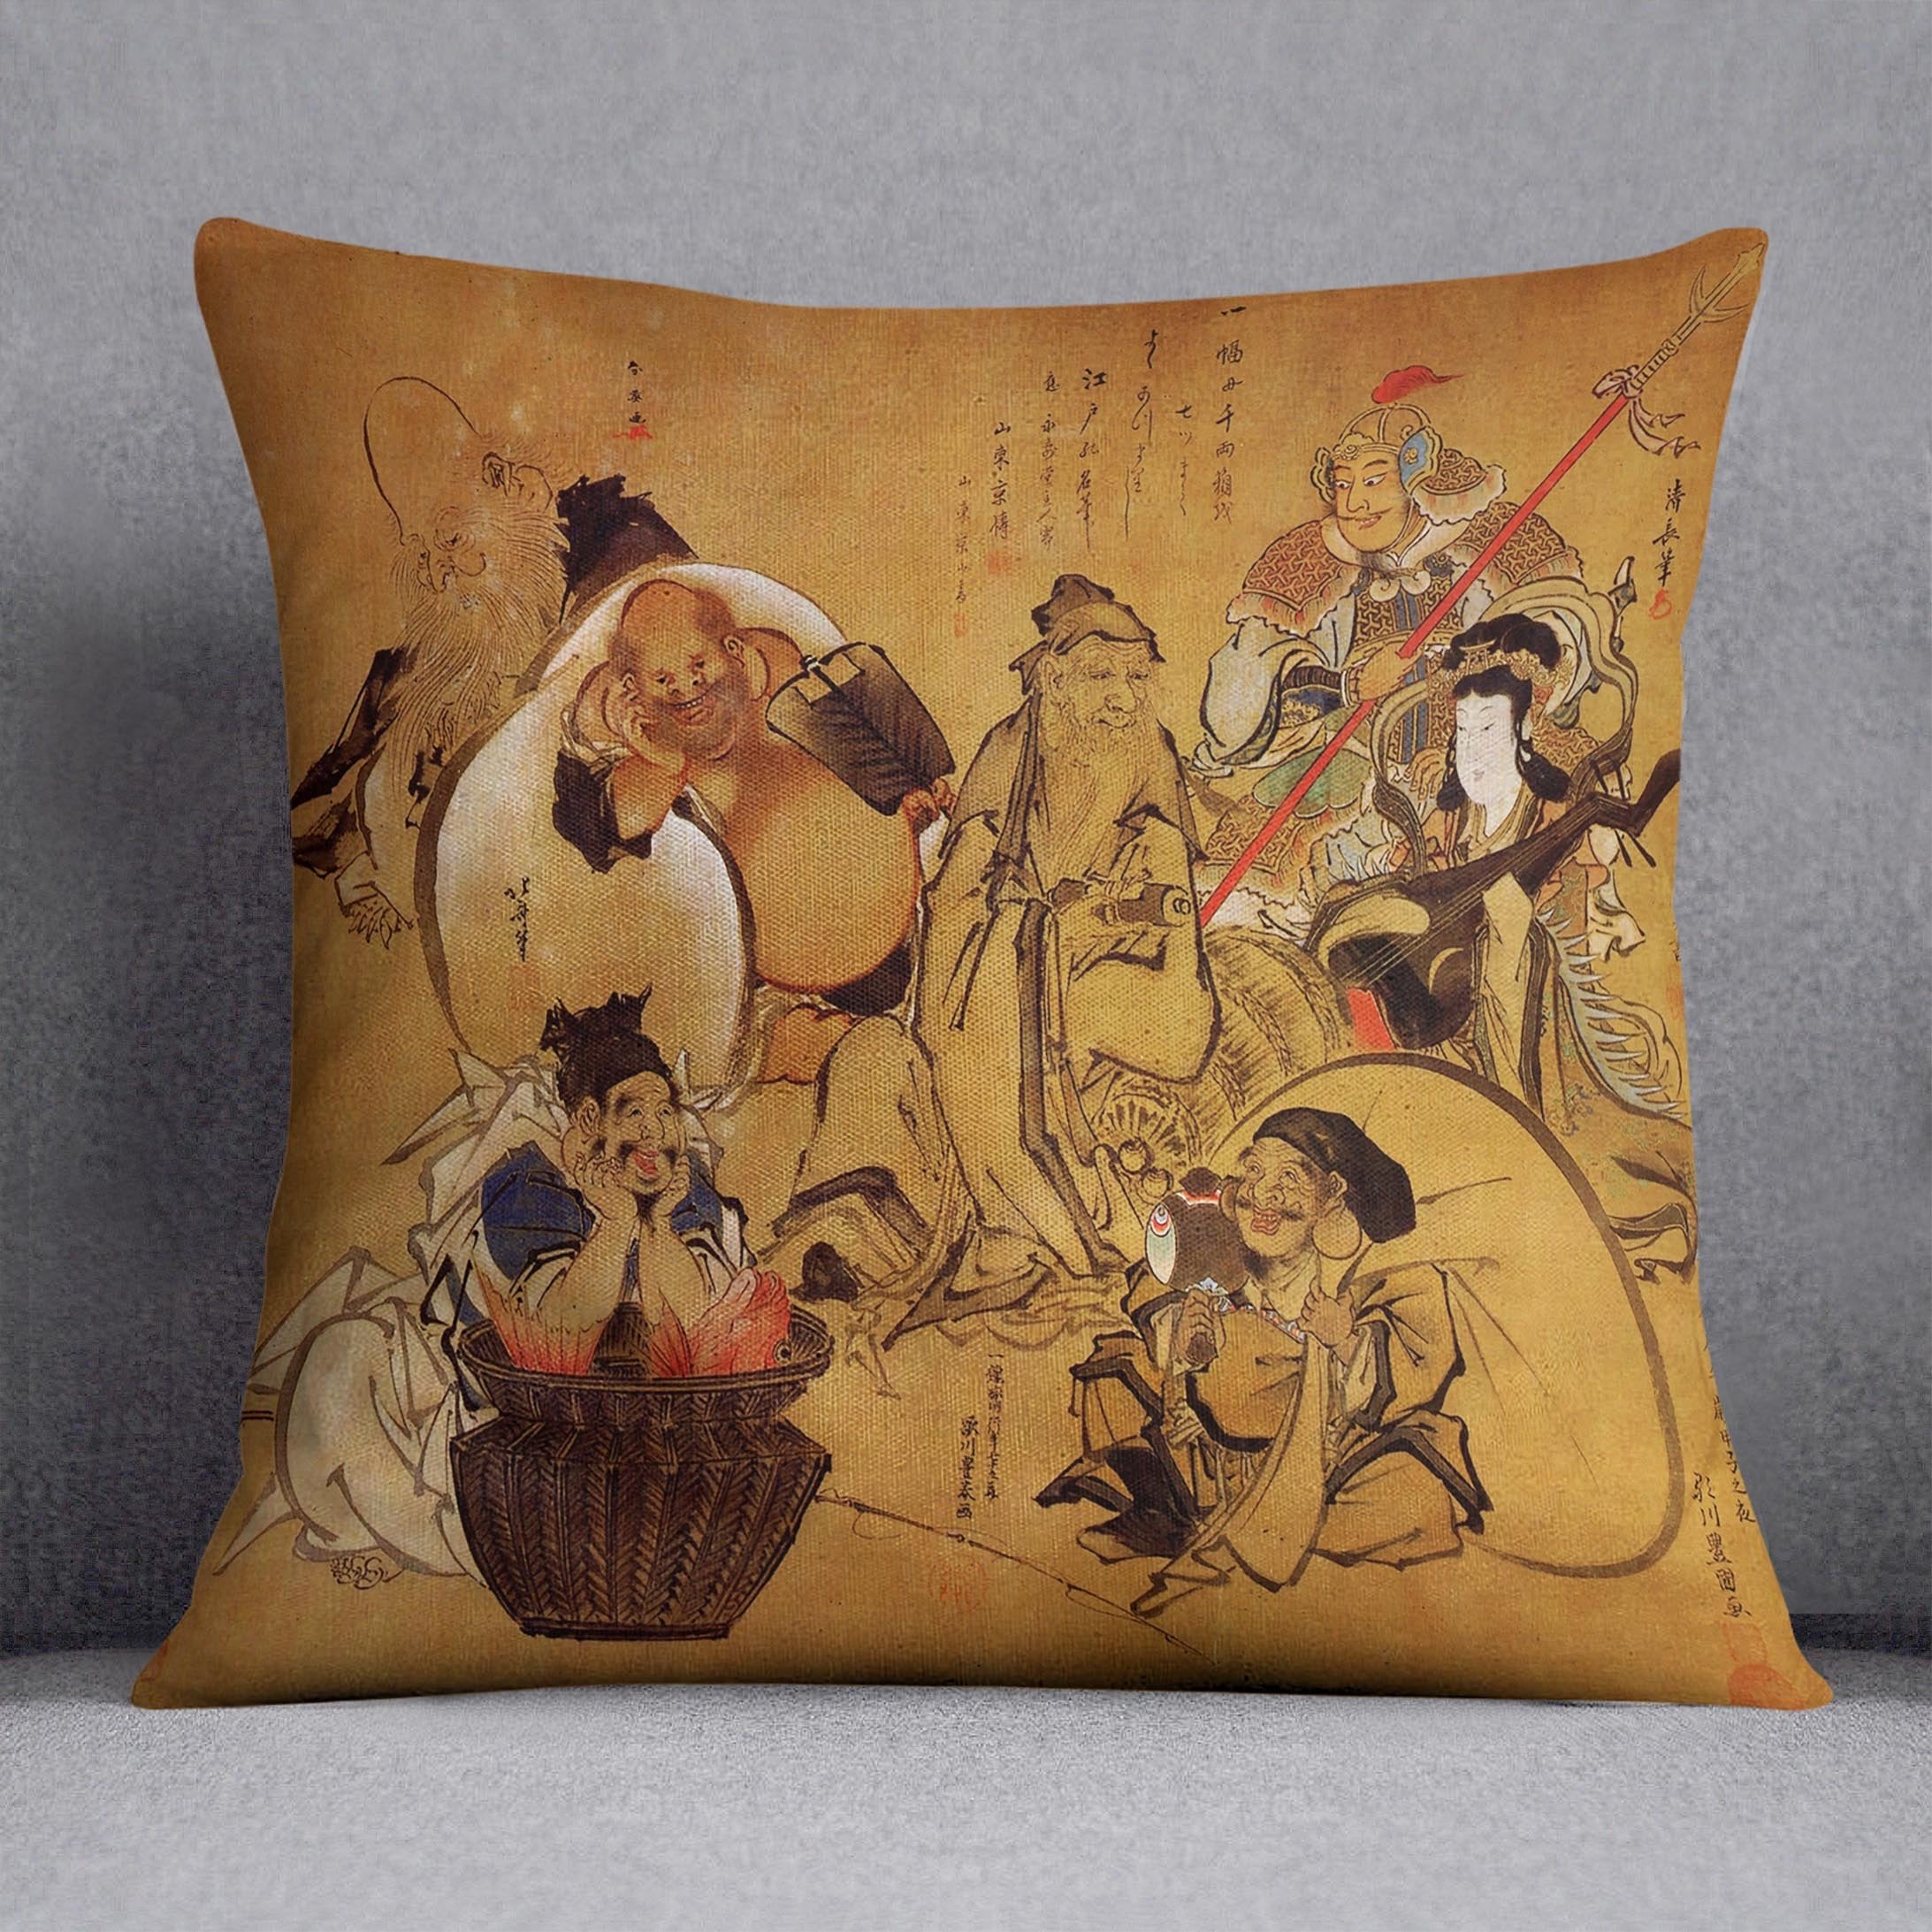 Seven gods of fortune by Hokusai Throw Pillow